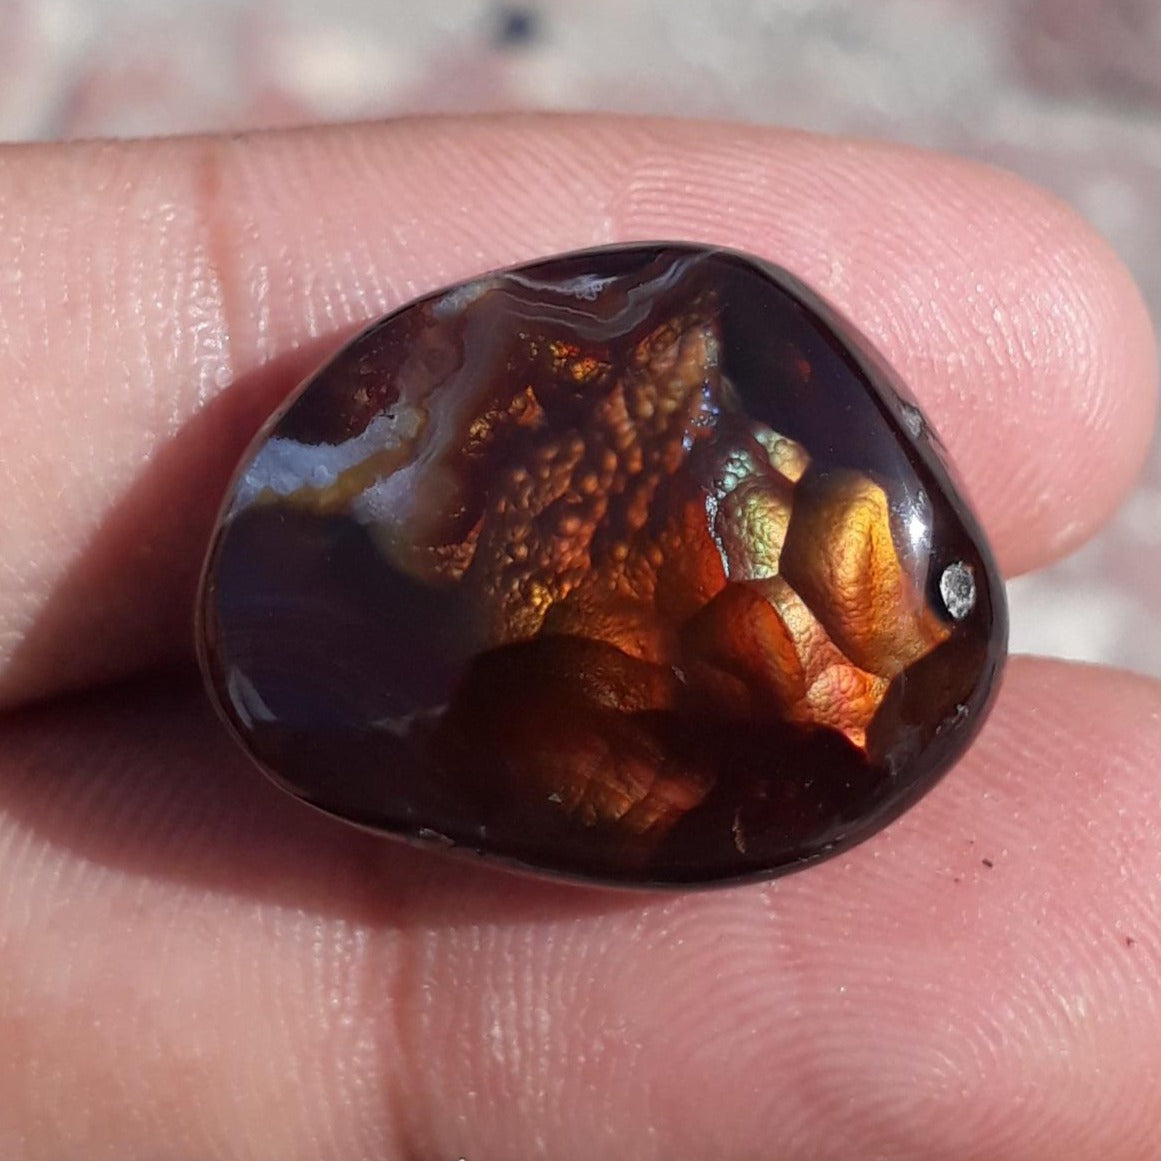 27ct Mexican Fire Agate,  Rare Fire Agate, Suitable for Pendant - Perfect gemstone Gift for Gem Lover, Dimensions 23 x 18 mm